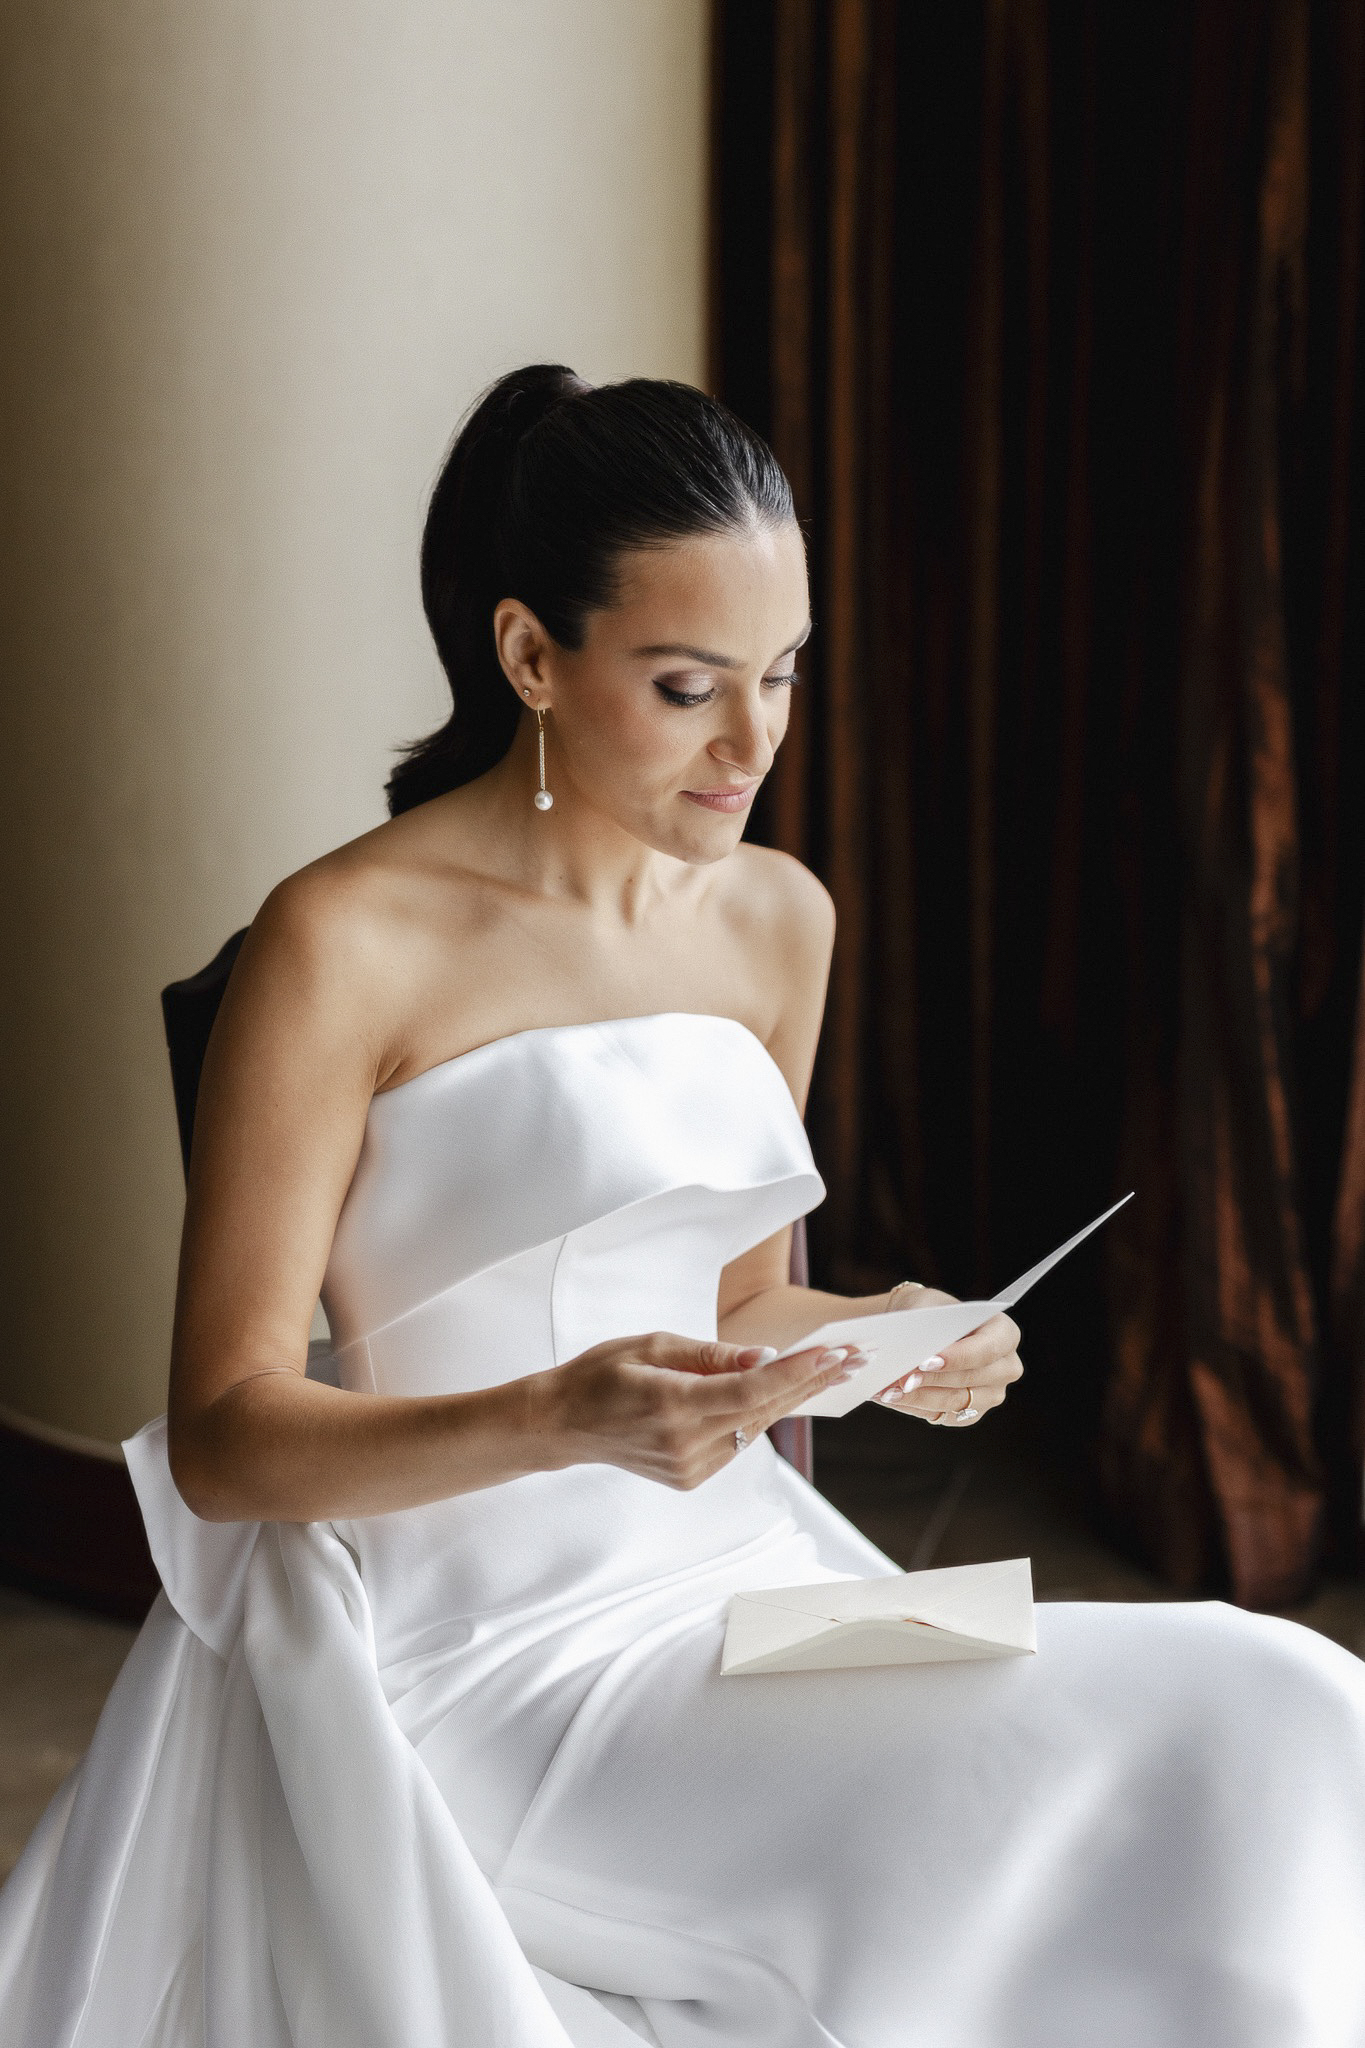 Bride reading card from the groom in hotel suite.